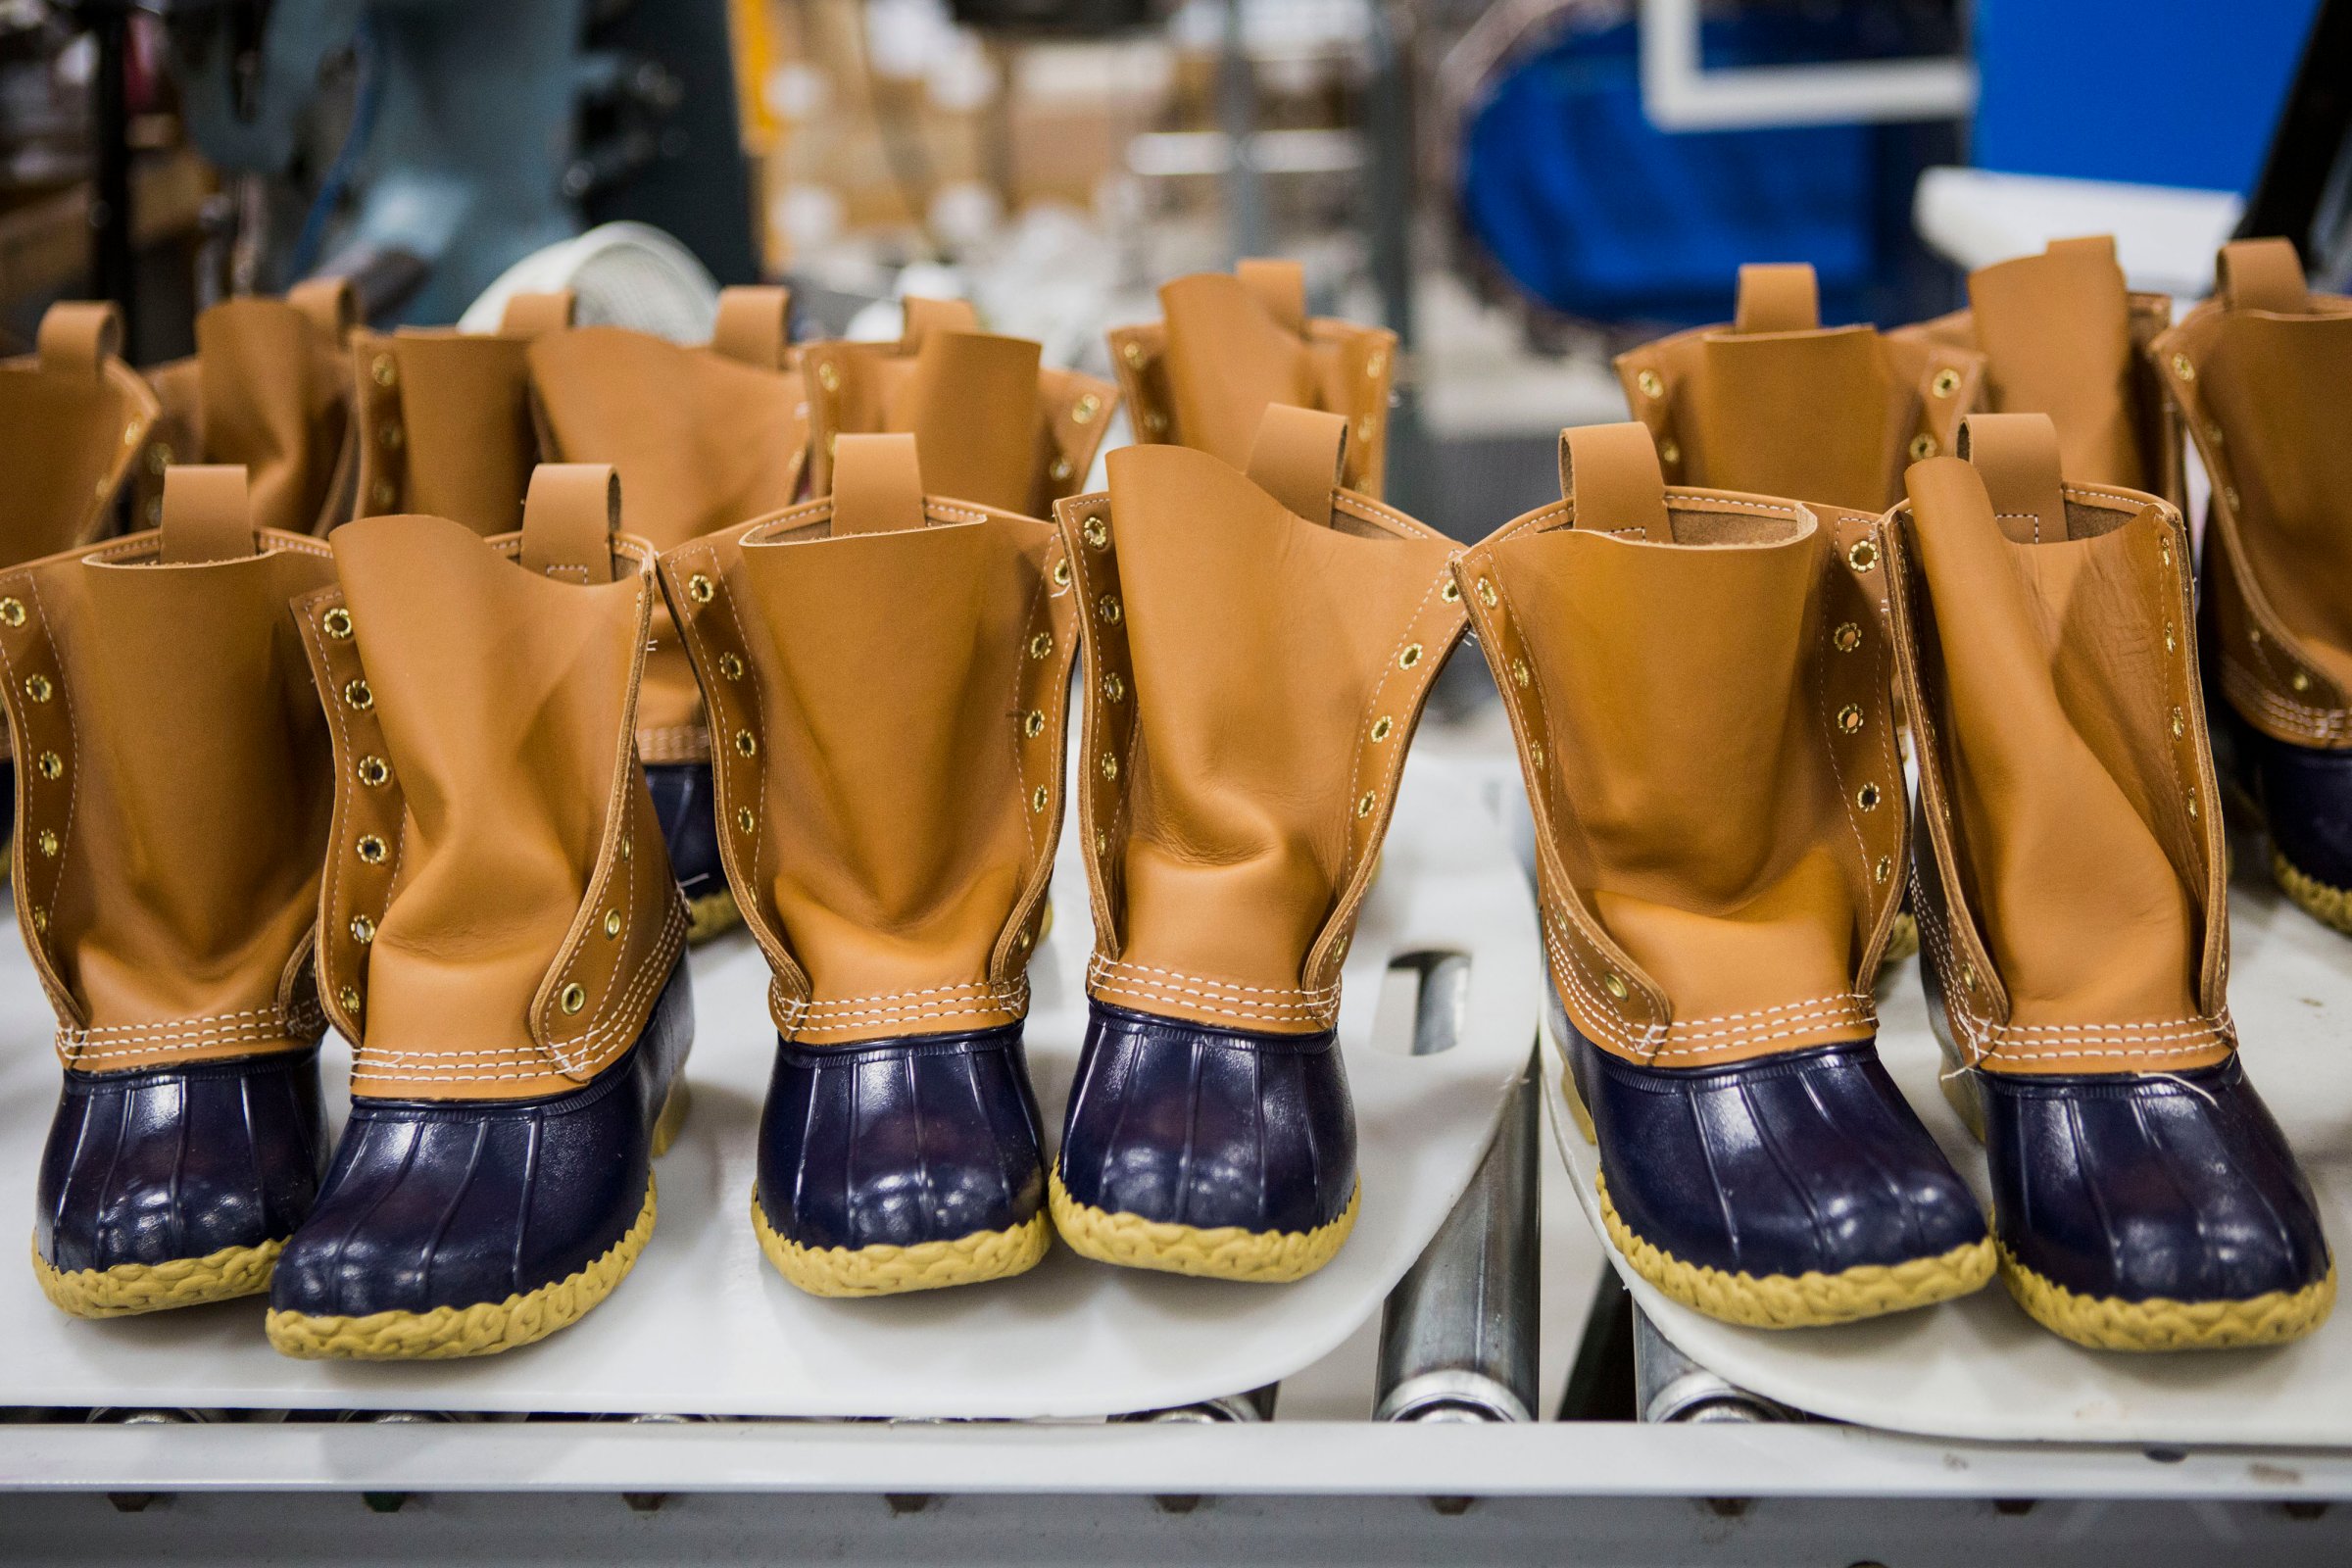 Operations Inside The L.L. Bean Manufacturing Facility